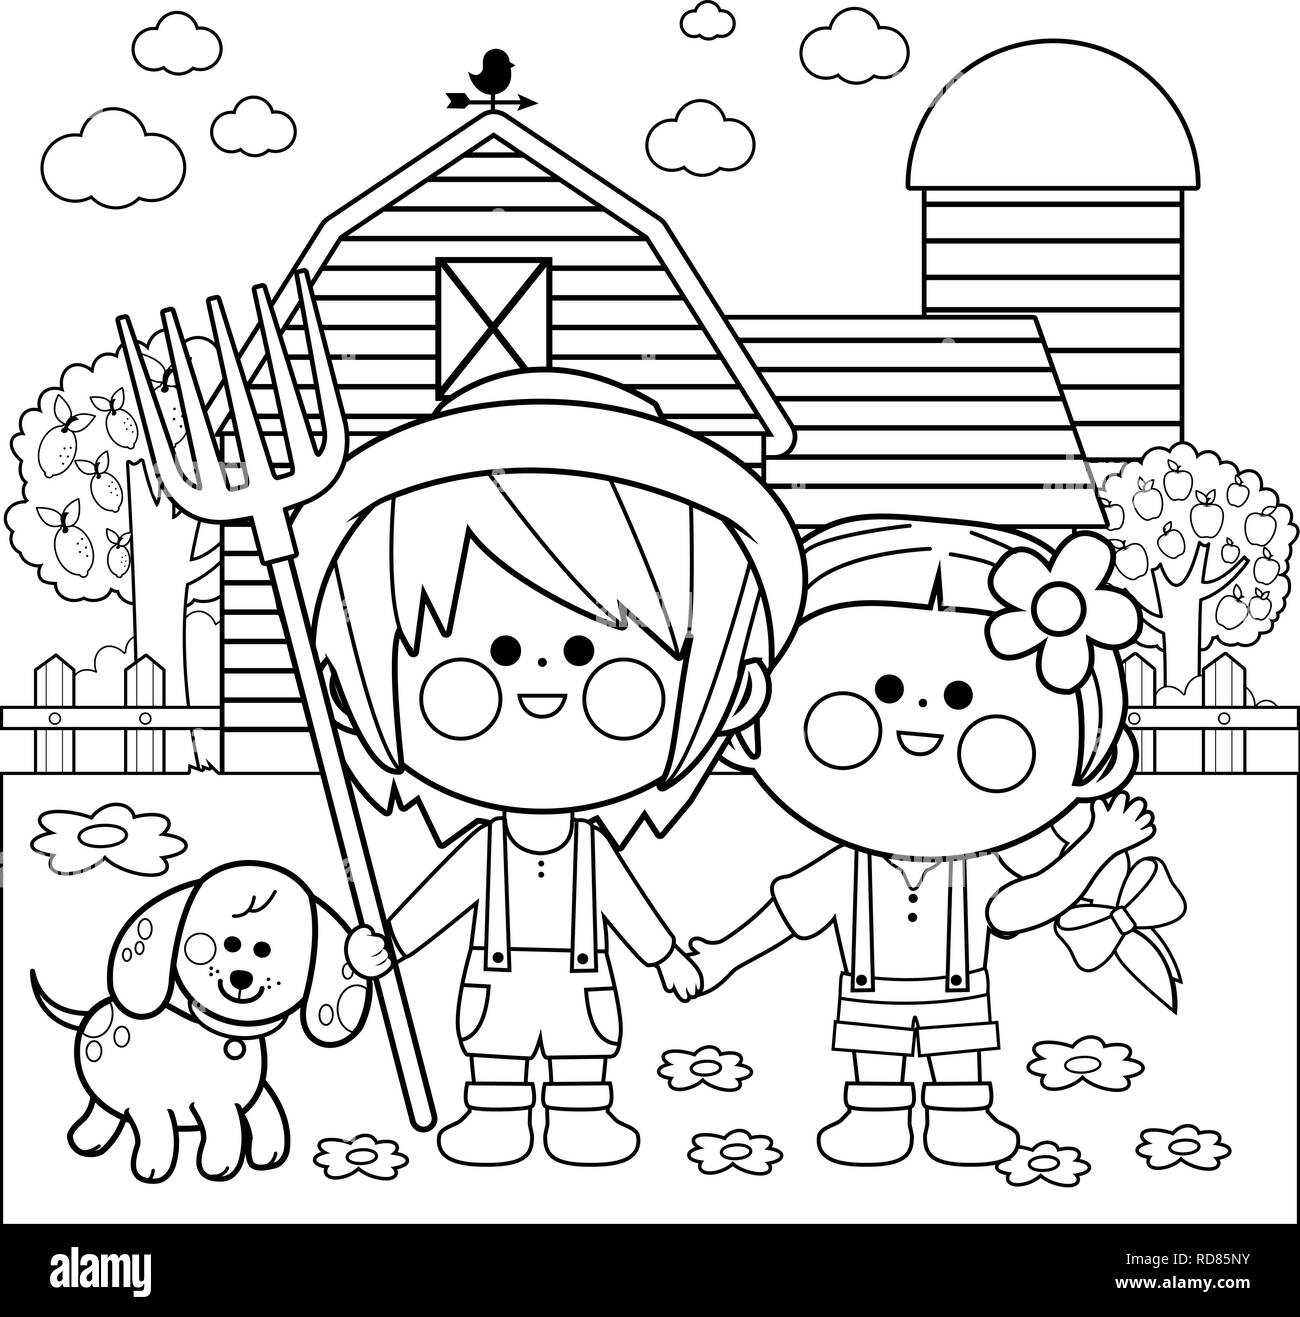 Little farmer boy and girl at the farm with dog, chicken, barn, farmhouse, fence and trees. Black and white coloring book page Stock Vector